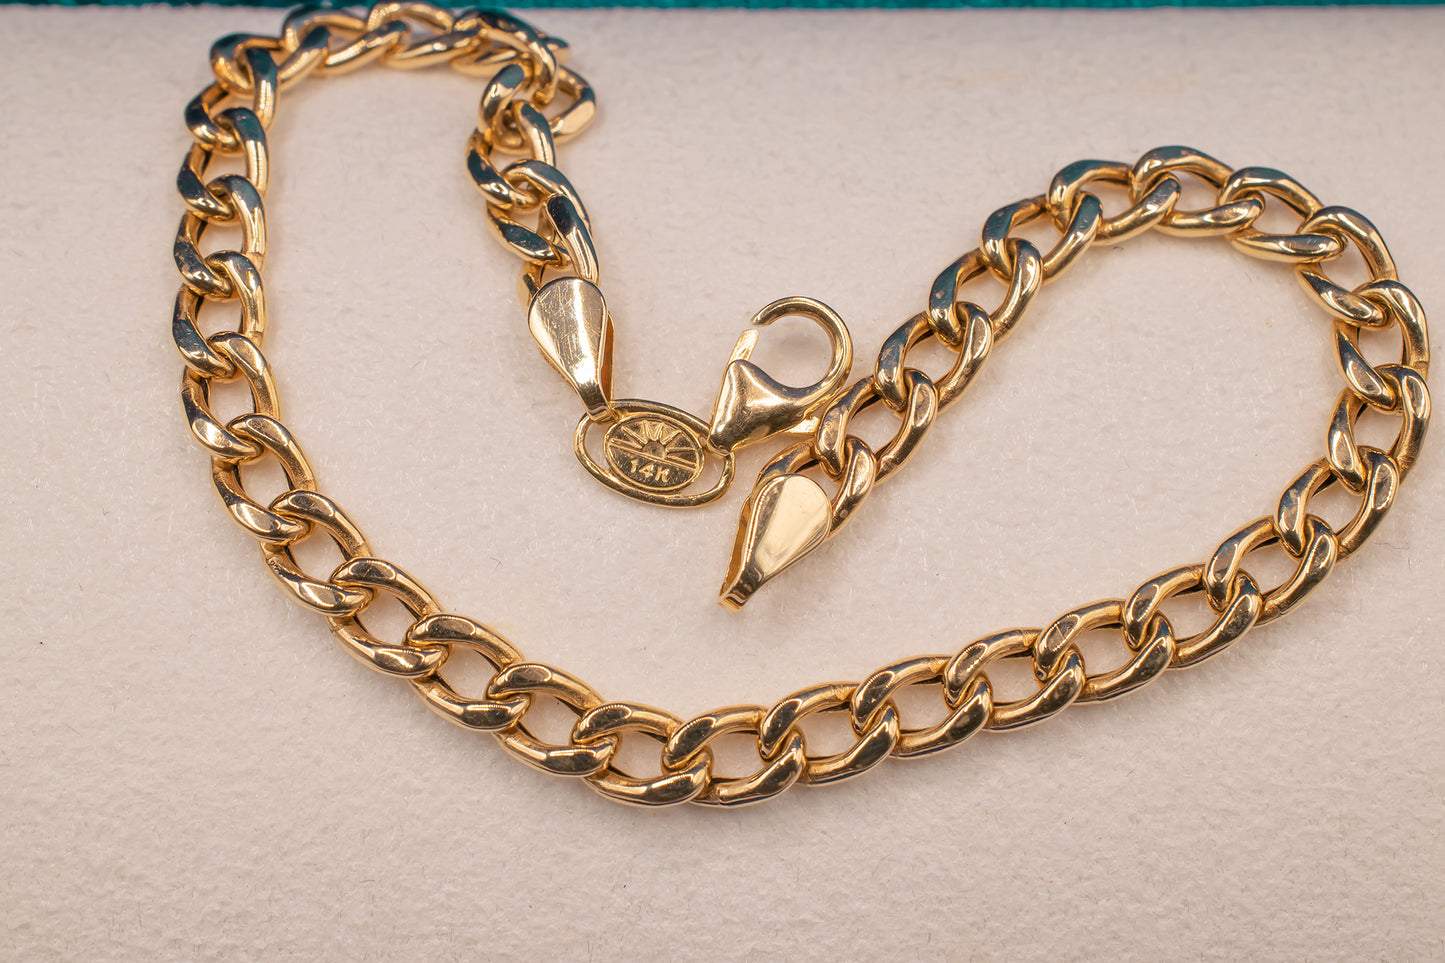 Vintage 14k Yellow Gold Curb Chain Curb Link Bracelet 7 Inches